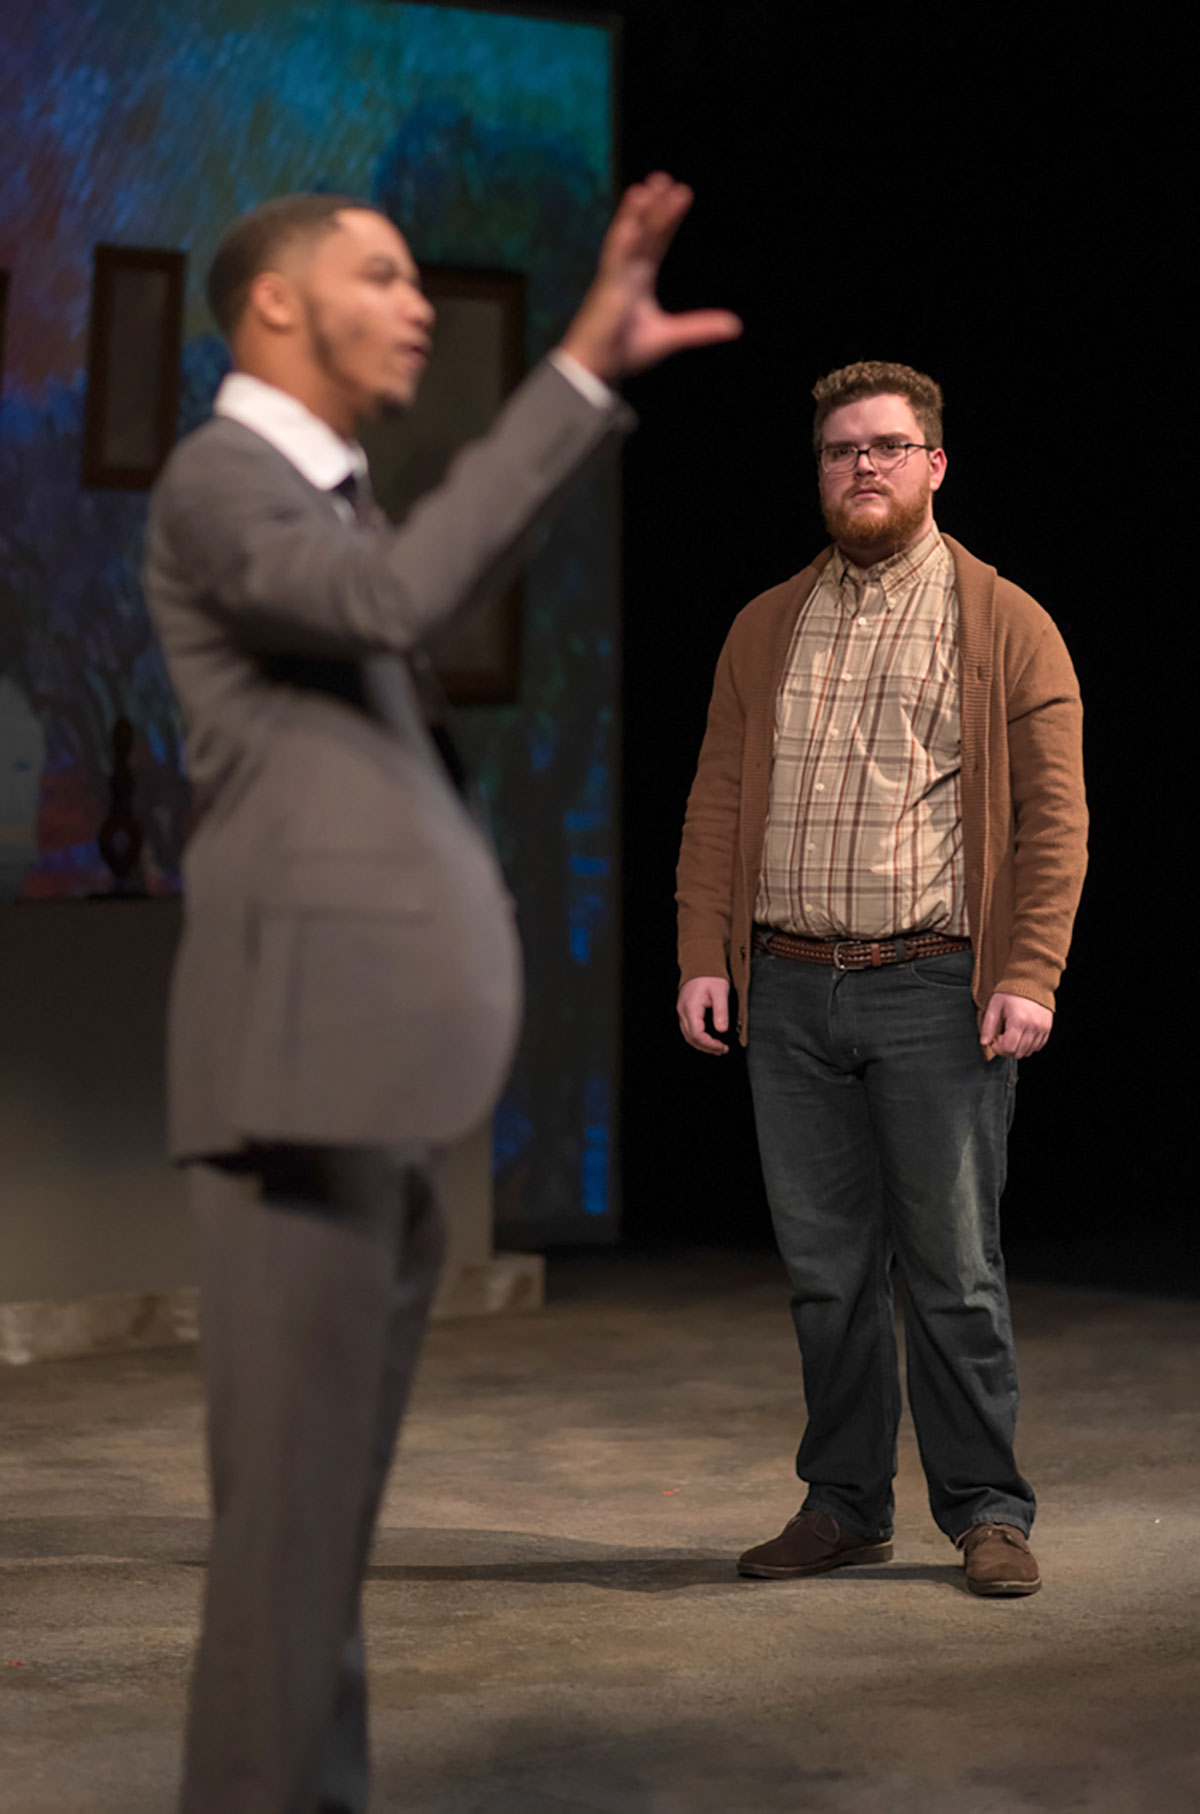 Ausin Jones plays Sterming North and Josh Pendino plays Paul Barrow in Lamar's production of "The Permanent Collection."